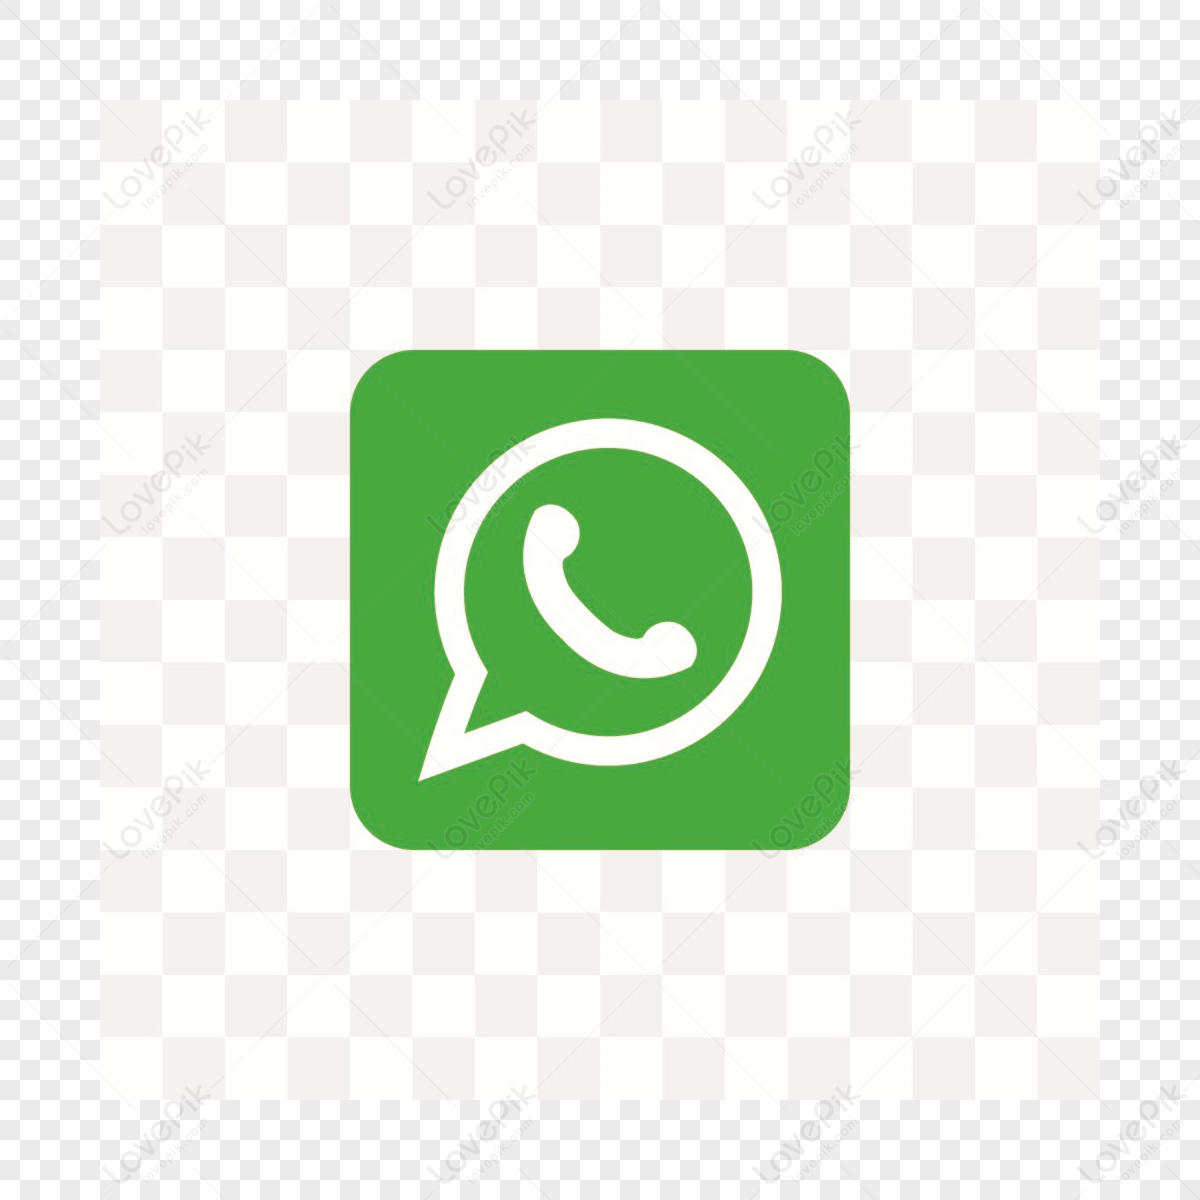 Meta Unveils 'WhatsApp Business' App to Benefit Small Companies